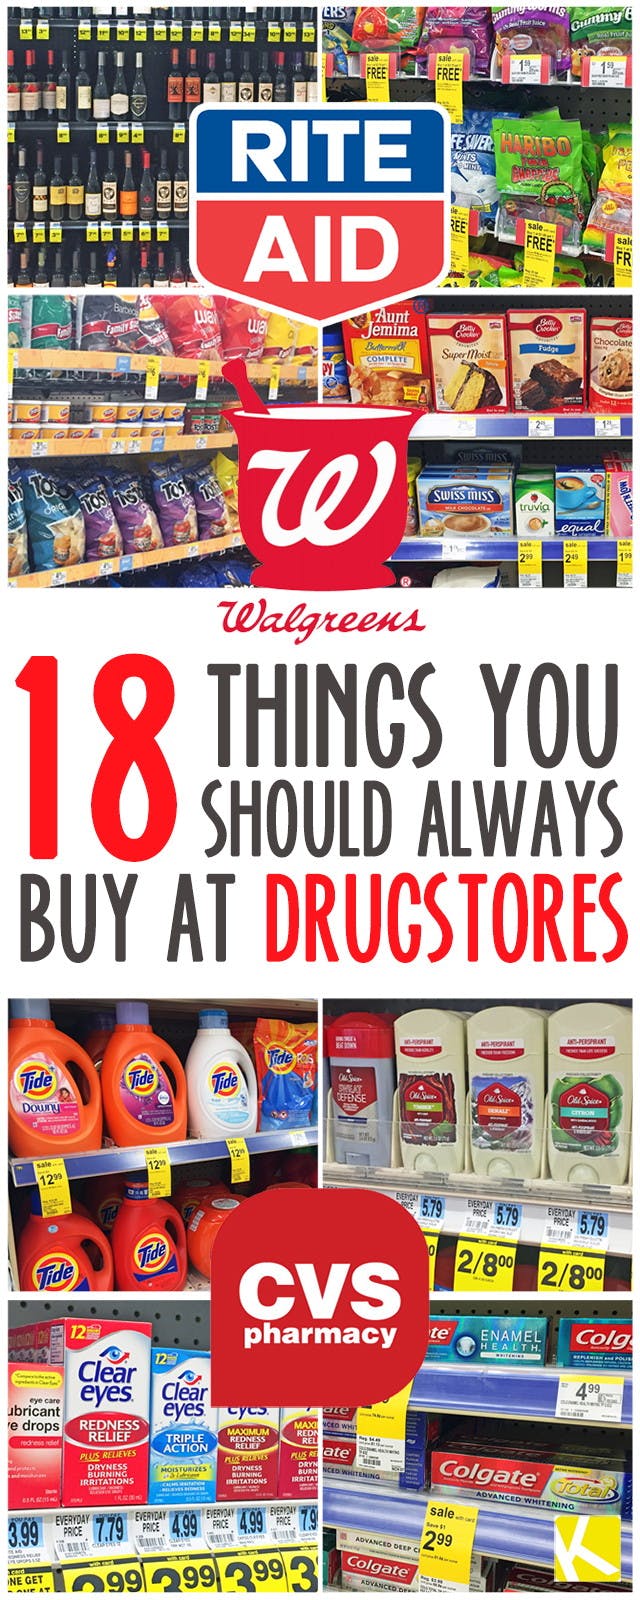 14 Shocking Things You Should Always Buy at Drugstores